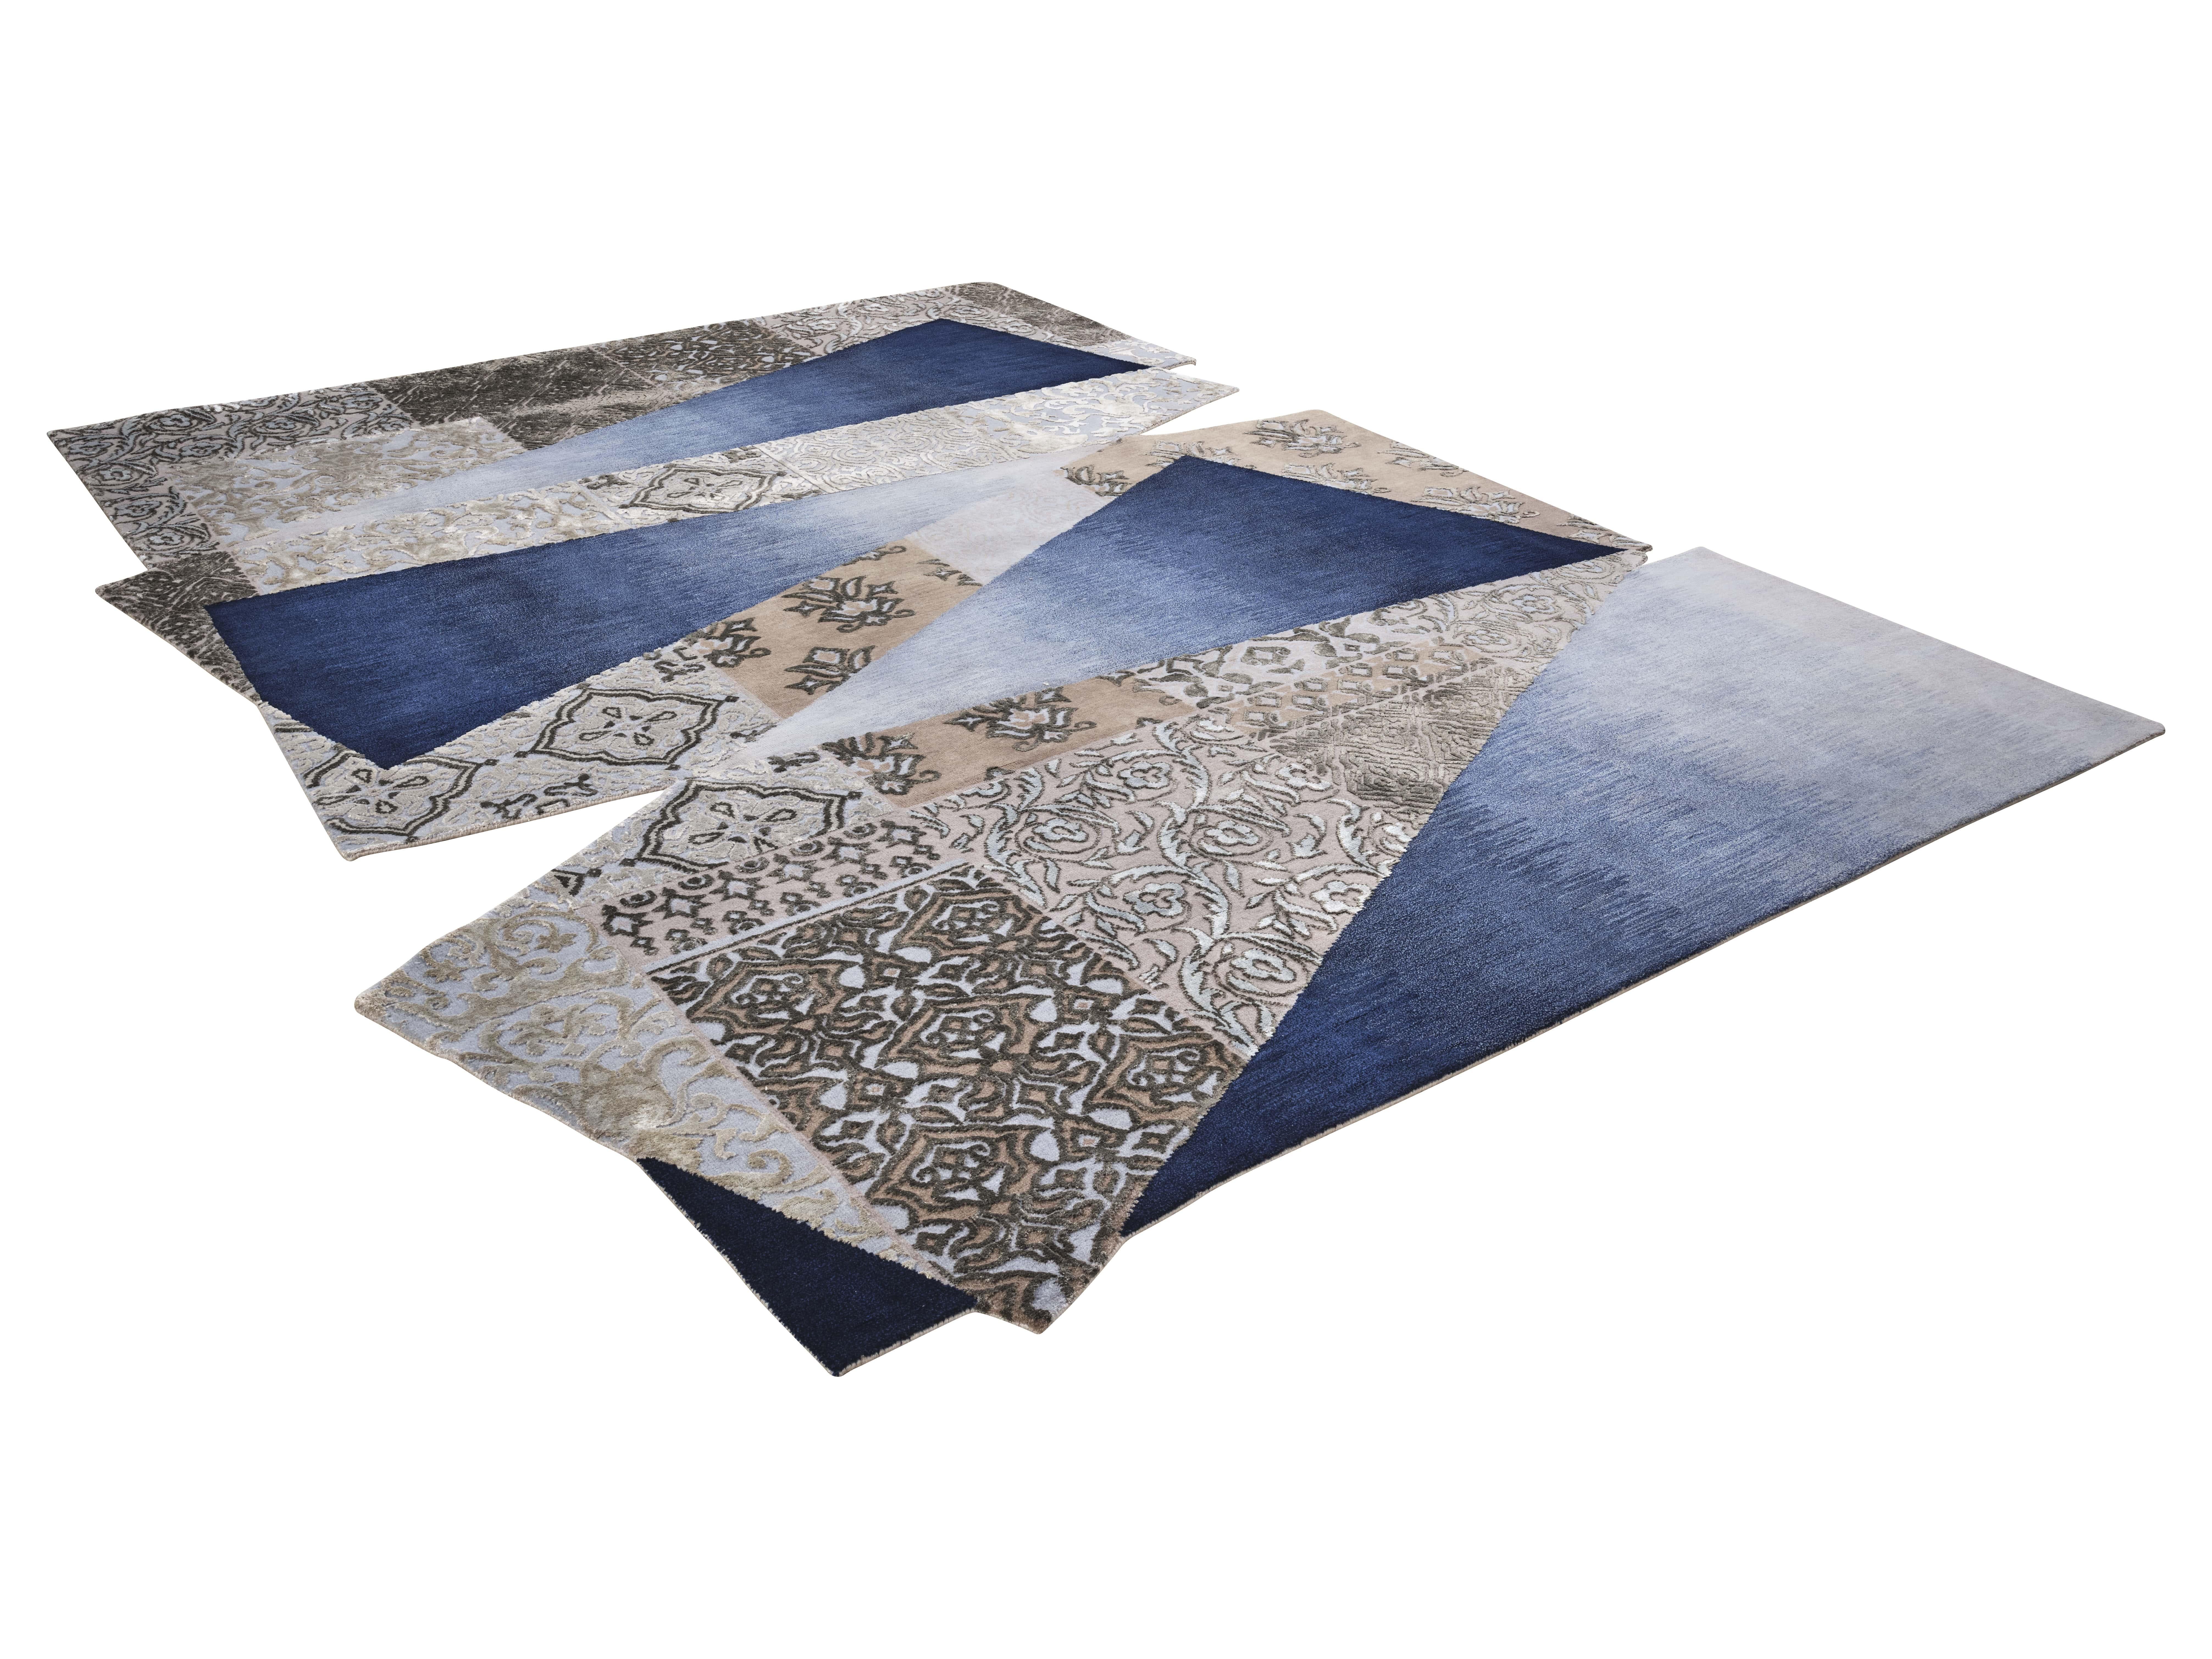 Inspired by the interesting pattern of the blue limestone river, Aguas Turquesas Millpu in Peru. This is nature and art in motion. The carpet maps the layers of water and land, the meeting and parting ways of the elements of earth. The carpet